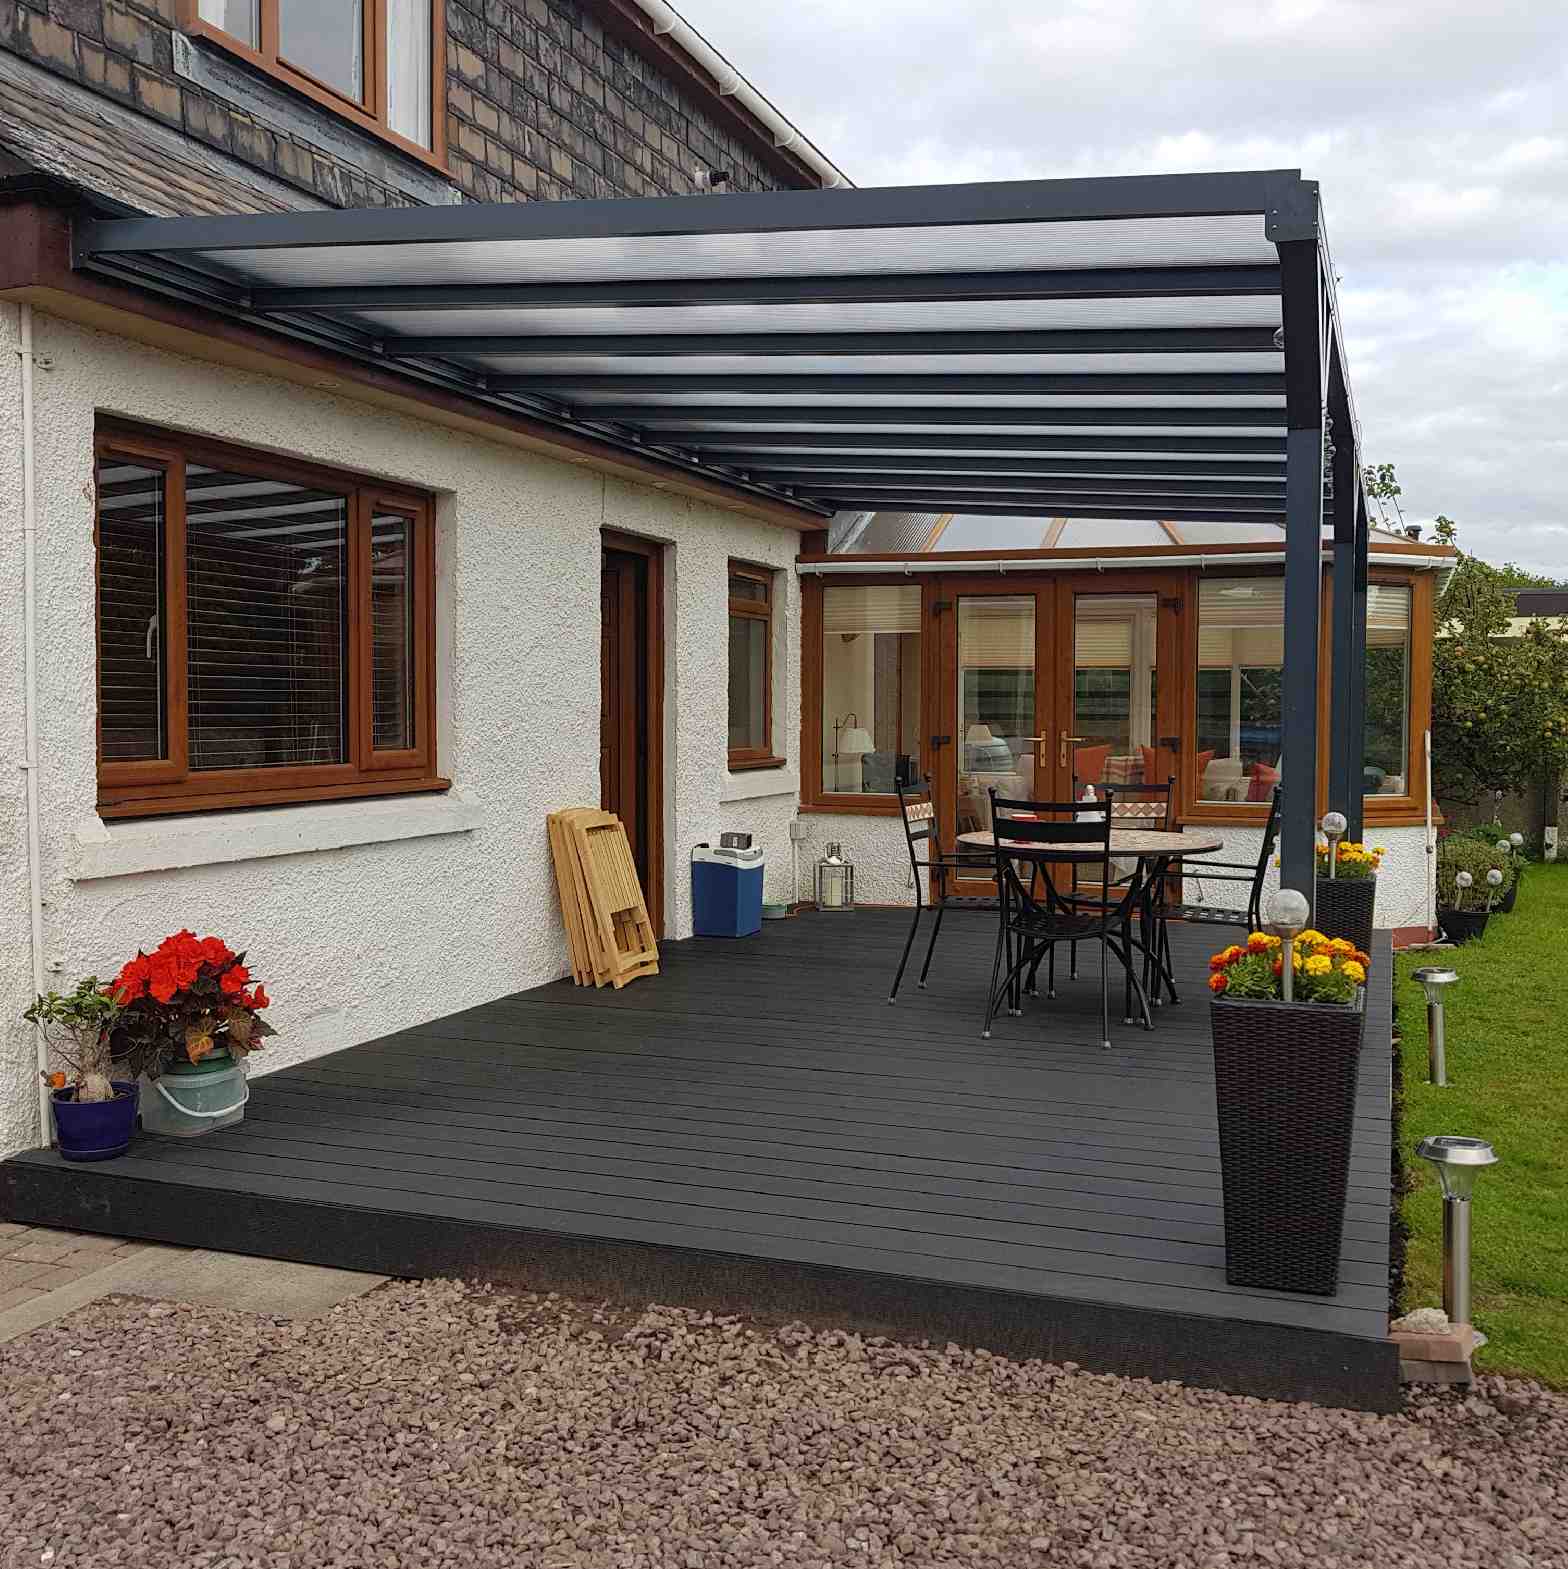 Buy Omega Verandah, Anthracite Grey, 16mm Polycarbonate Glazing - 6.3m (W) x 4.5m (P), (4) Supporting Posts online today